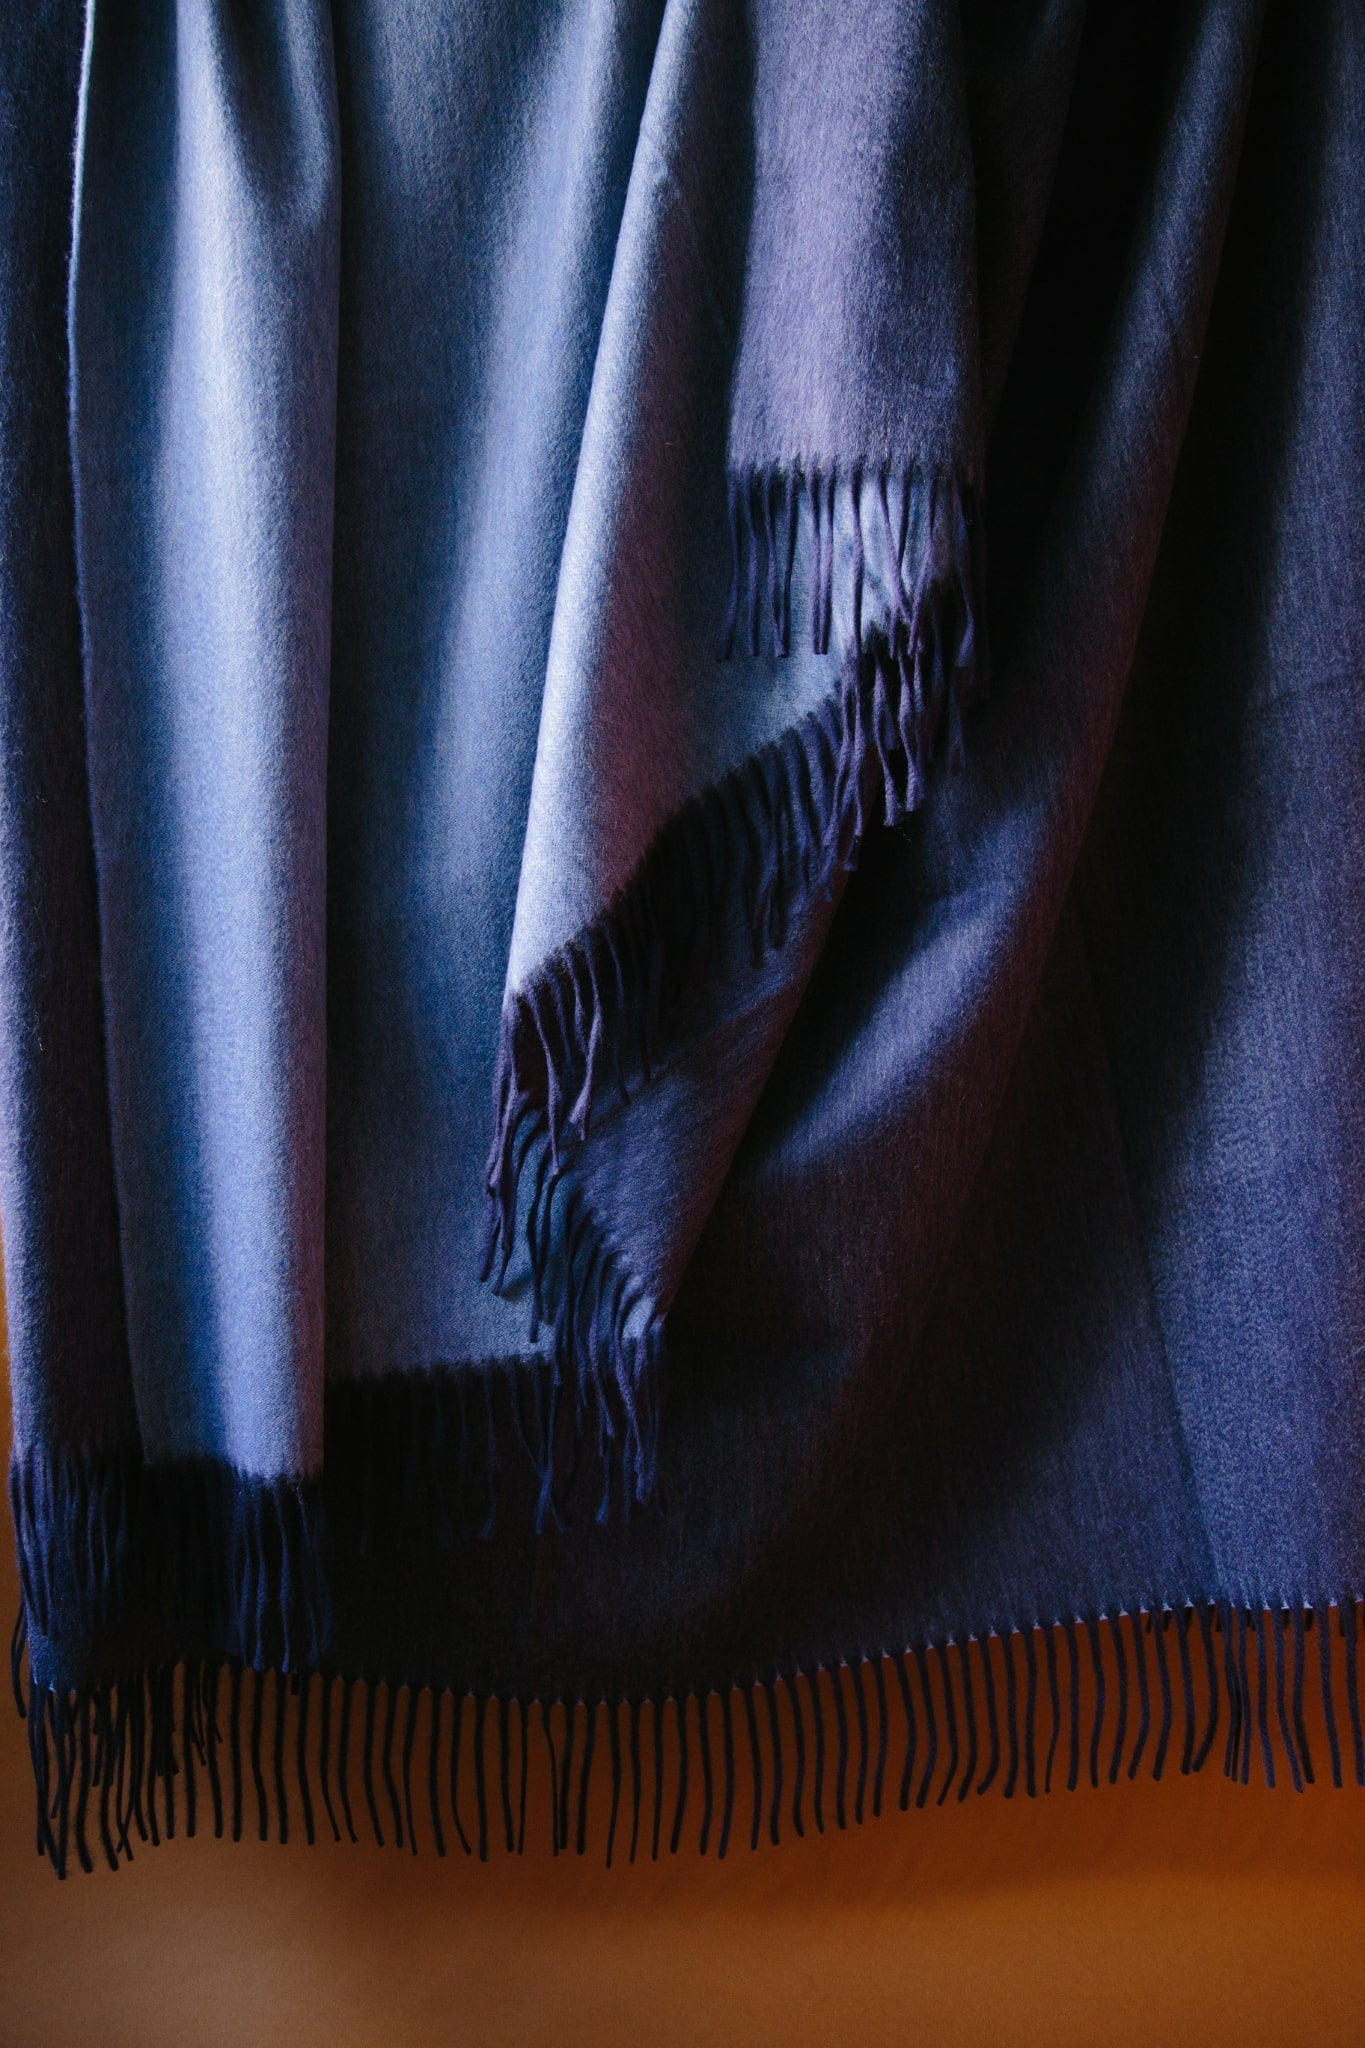 Large cashmere throw. Two sided reversible colour; navy and denim blue. Draped against a brown background with natural light.